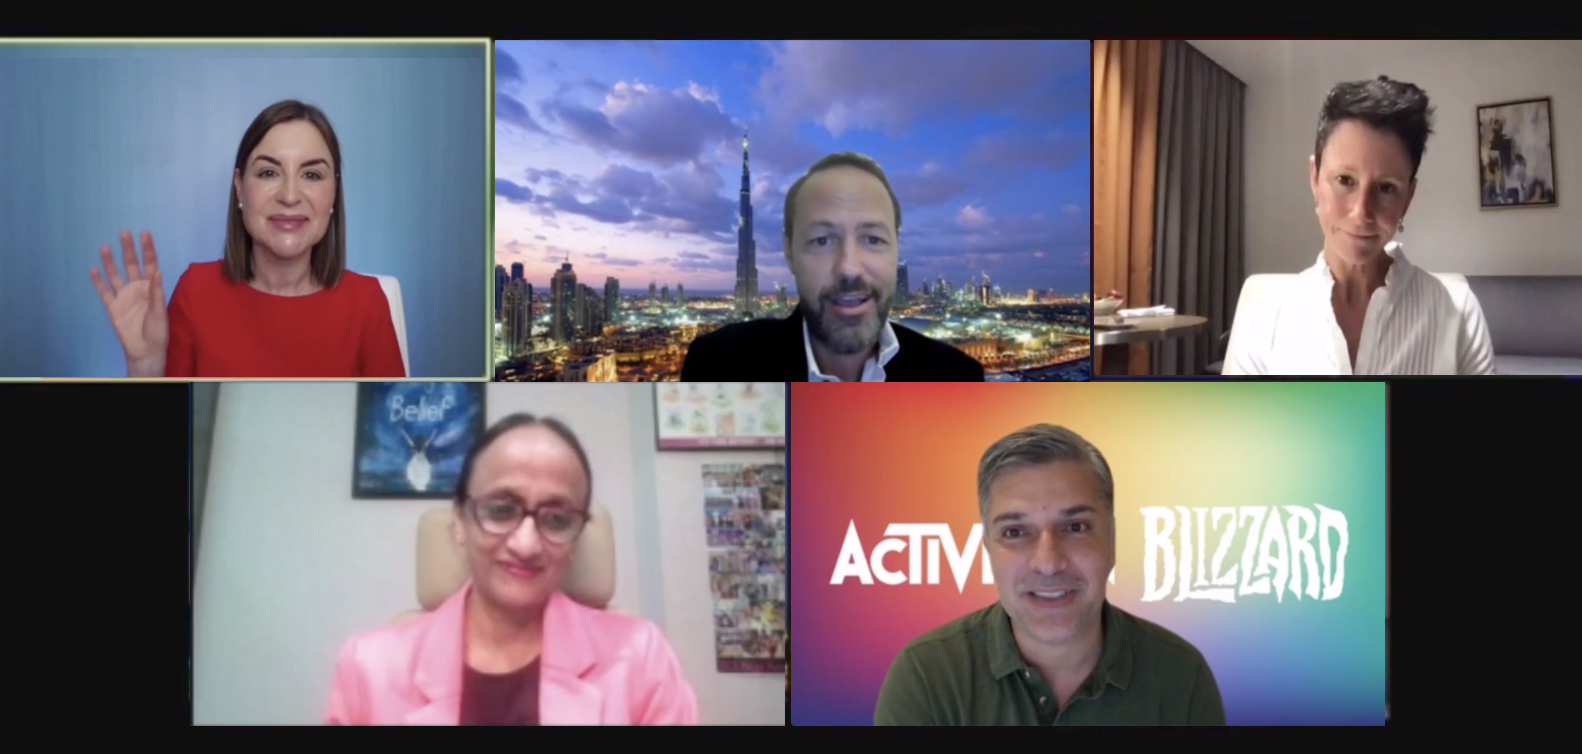 Siegel+Gale's Global CMO, Margaret Molloy, on a video call with 4 marketing executives on Asia Matters Summit